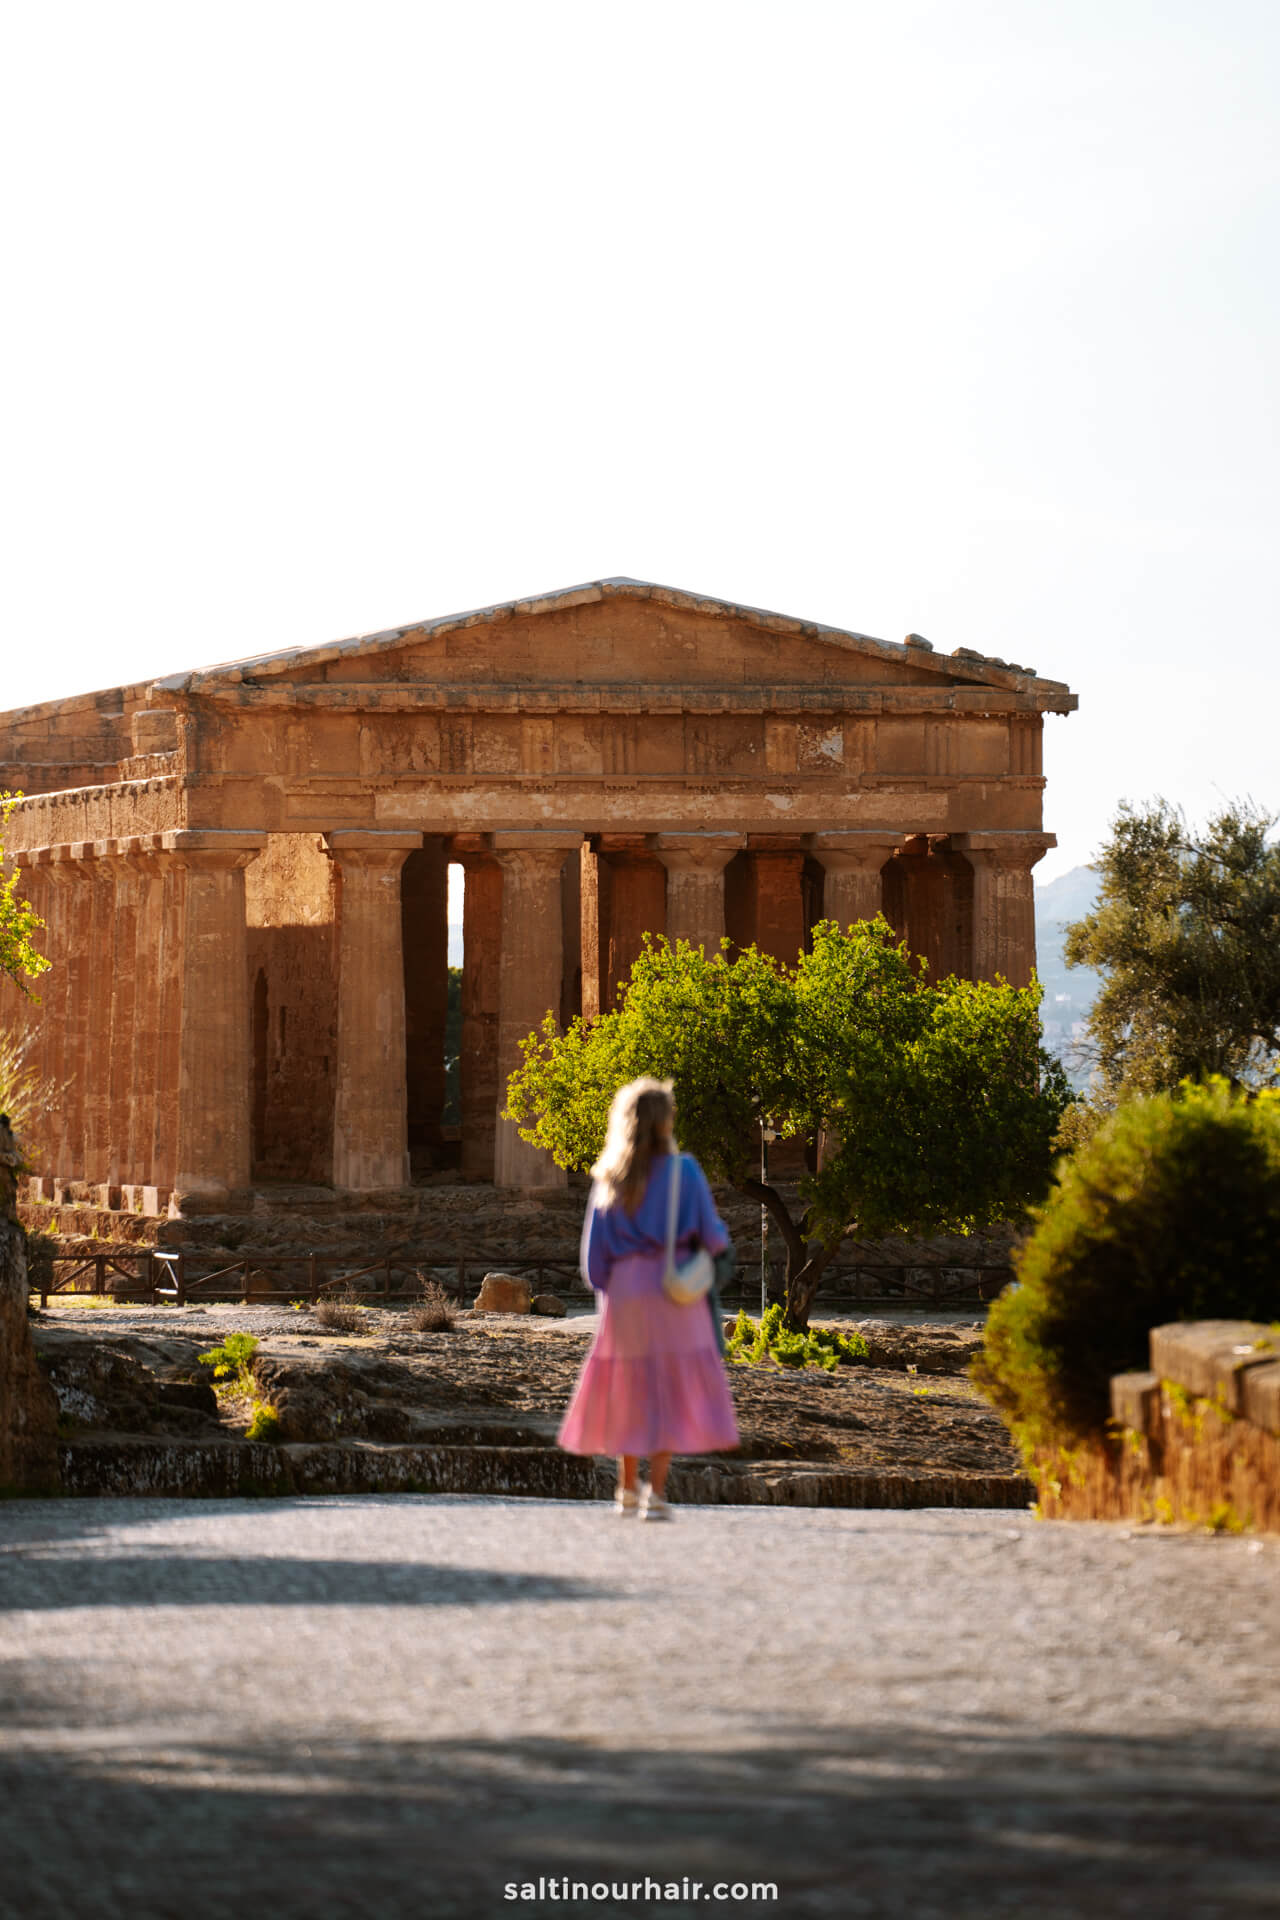 Things to do in the valley of the Temple of the Olympian Zeus sicily